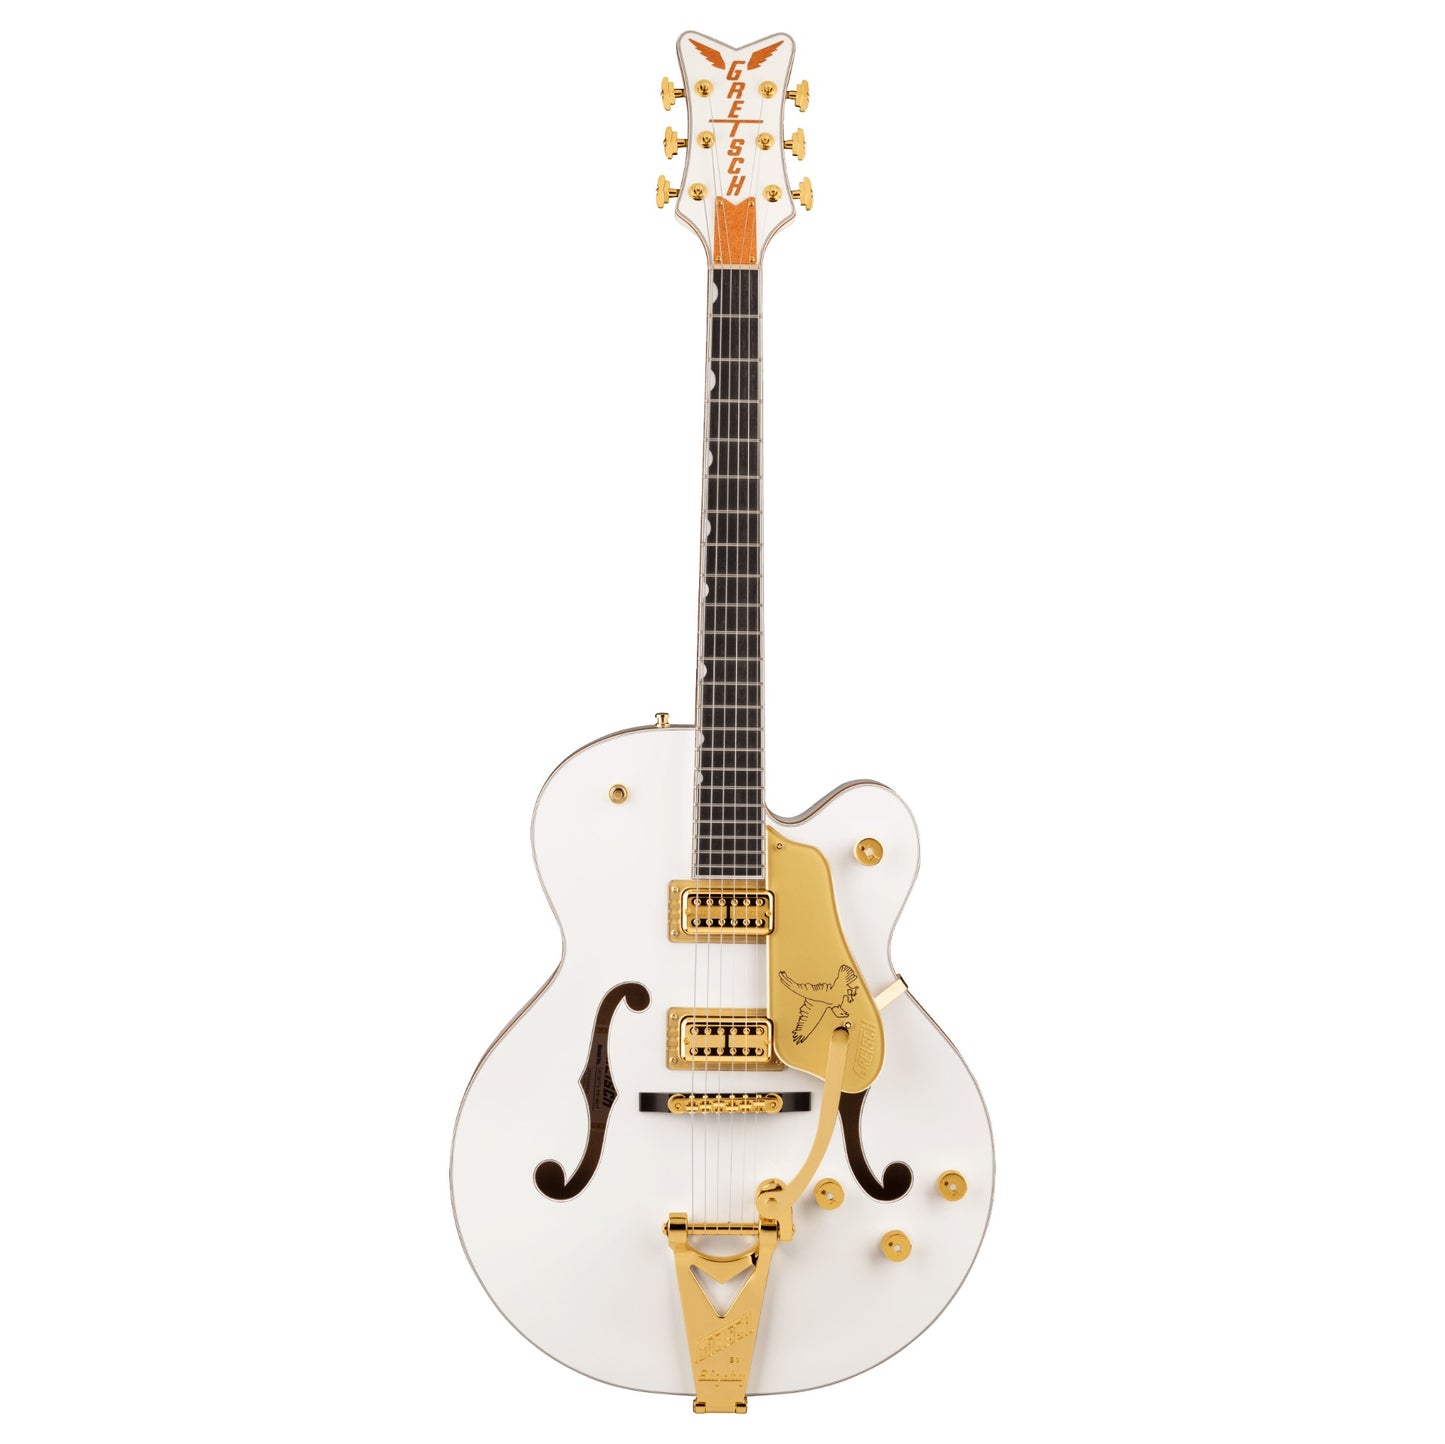 Gretsch G6136TG Players Edition Falcon Hollow Body Guitar - White